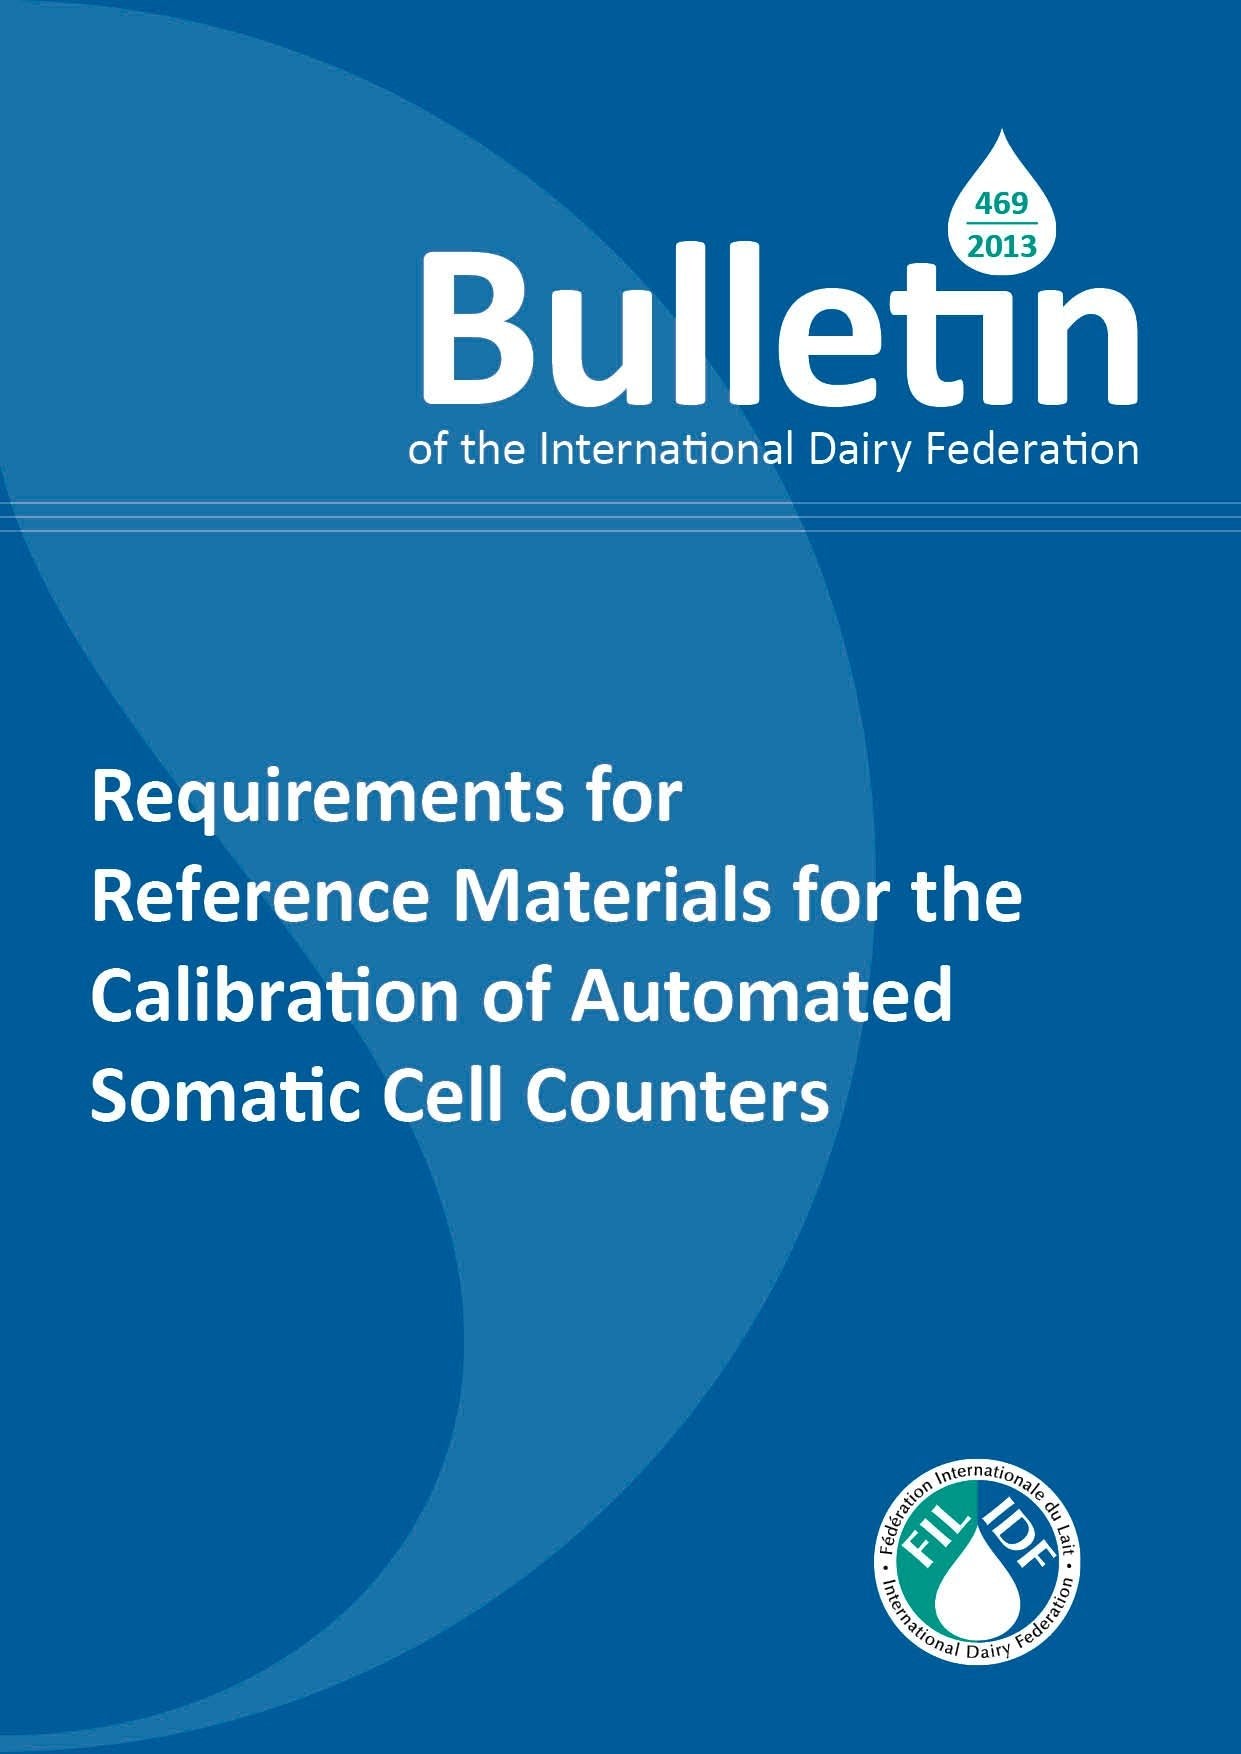 Bulletin of the IDF N° 469/ 2013: Requirements for Reference Materials for the Calibration of Automated Somatic Cell Counters - FIL-IDF